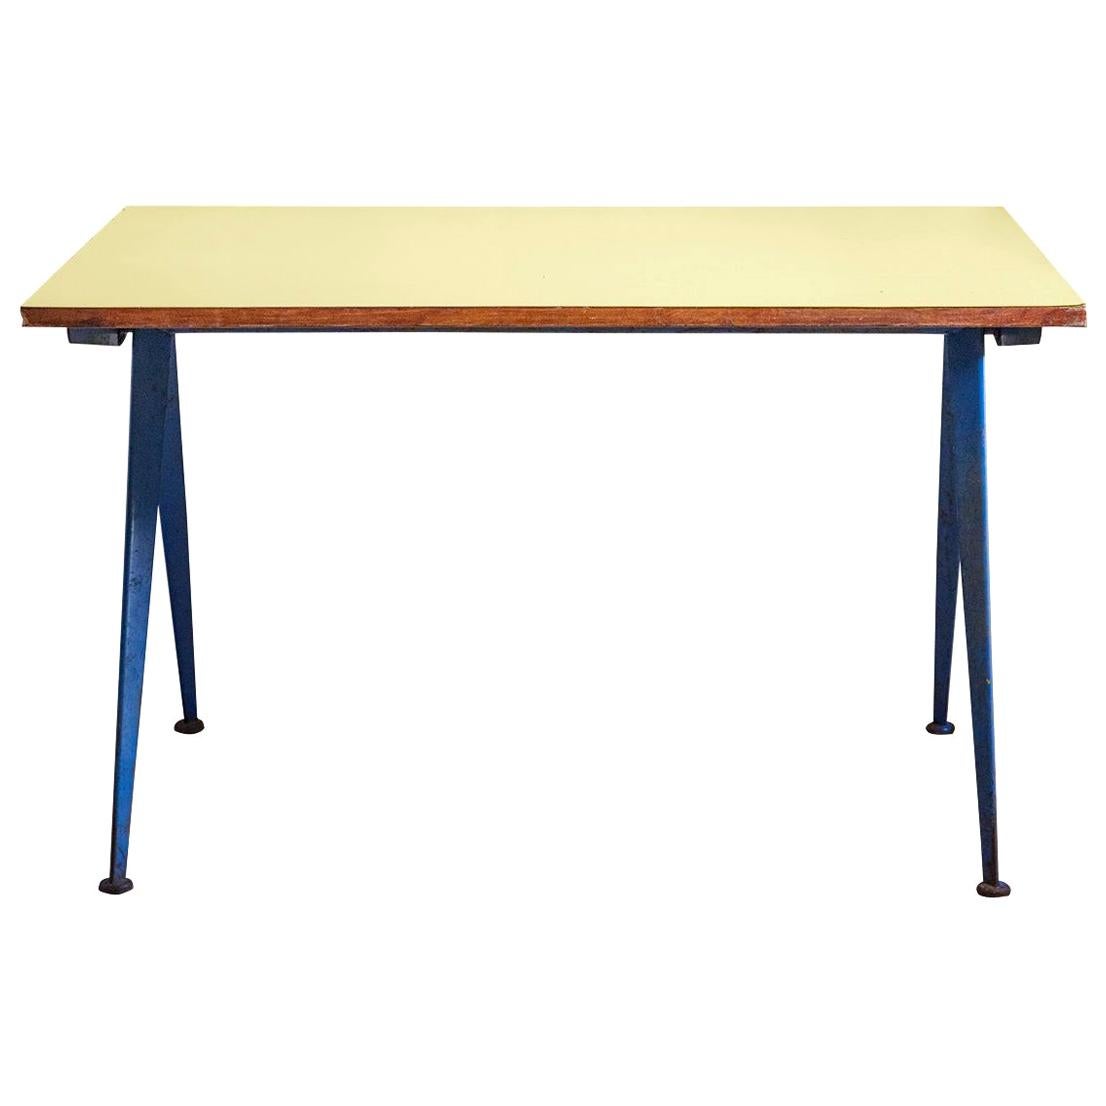 Cafeteria Table N. 512, "Compas Table" by Jean Prouve, circa 1953, France For Sale